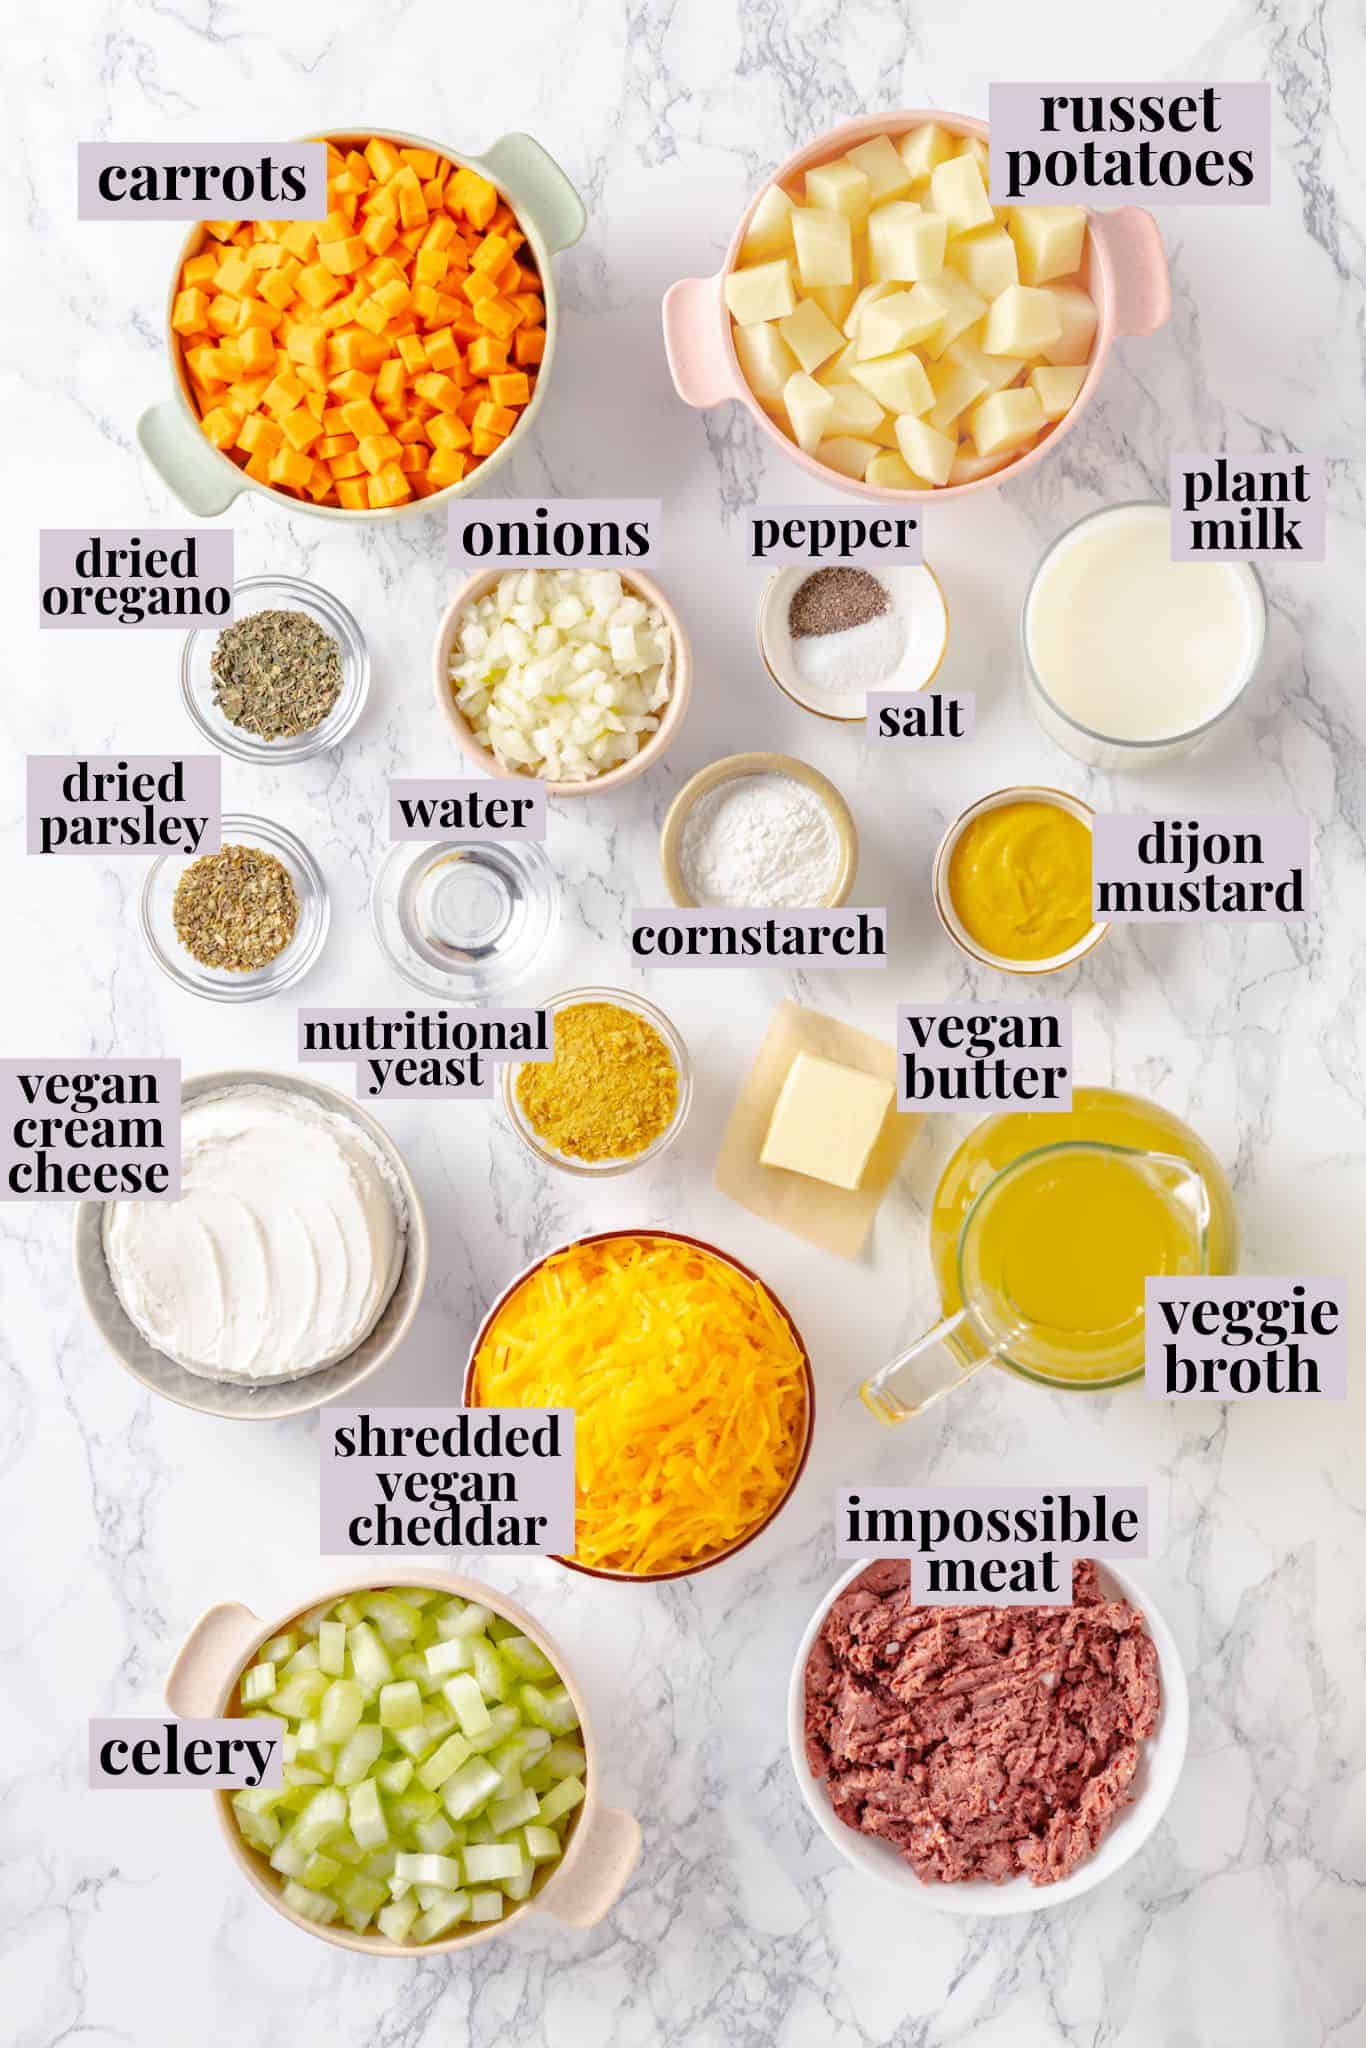 Overhead view of cheeseburger soup ingredients with labels